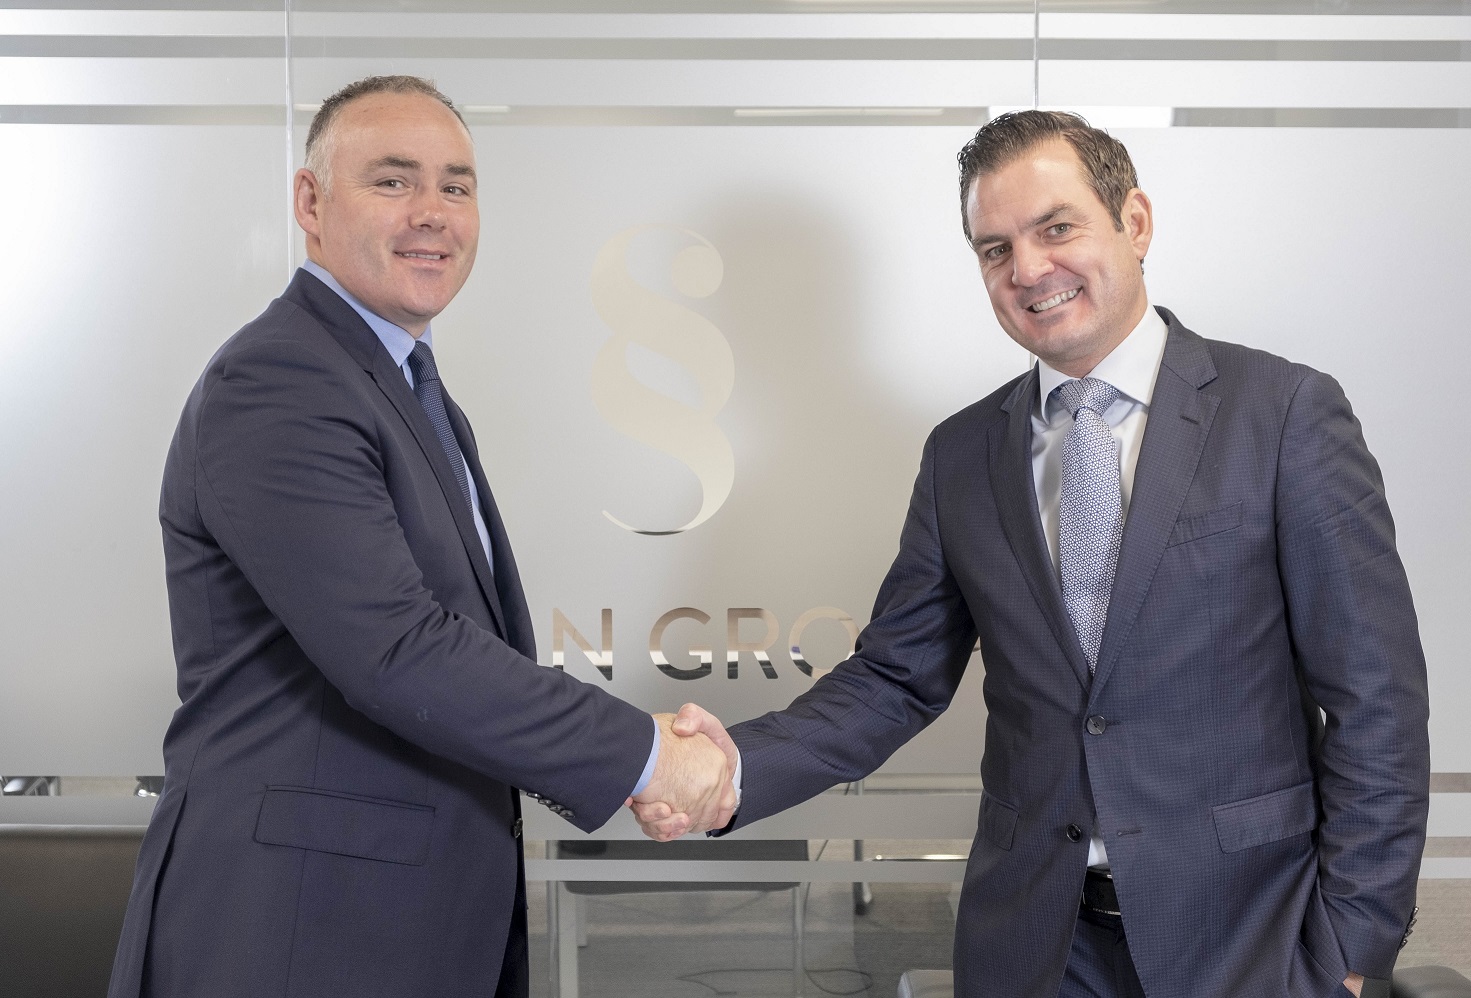 Swan Group secures £50m growth capital facility to accelerate delivery of affordable homes